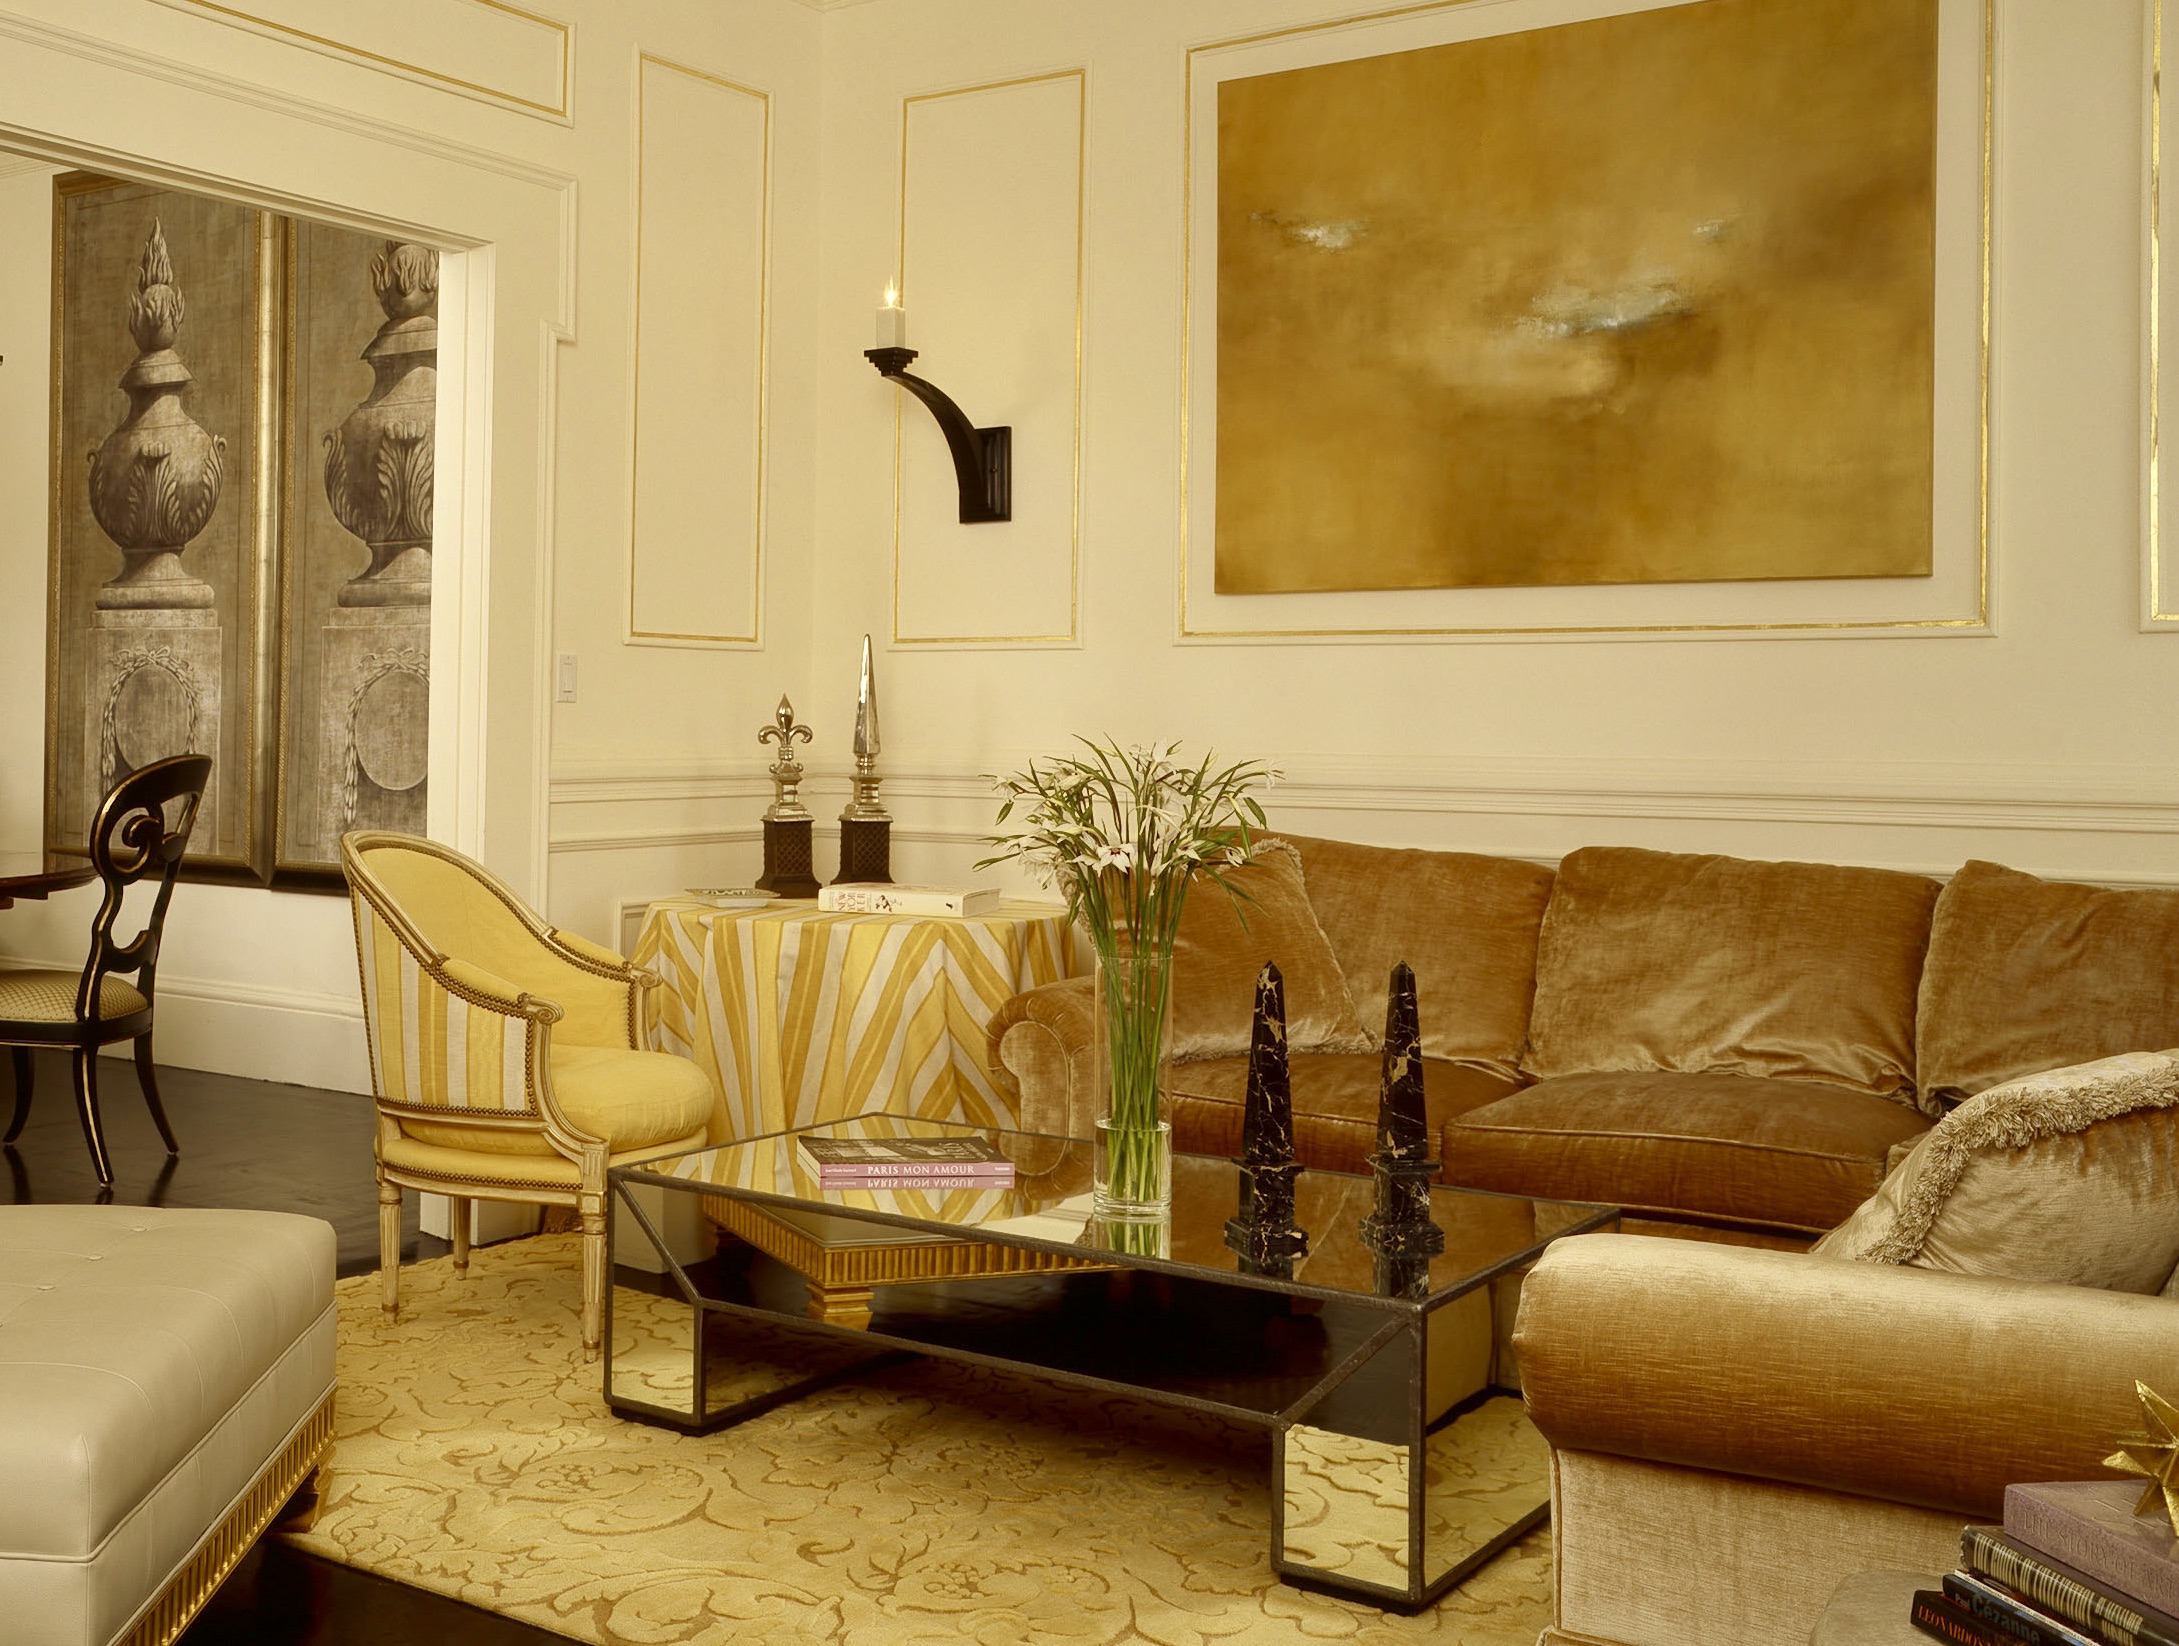 Luxury Interior Design Pacific Heights San Francisco Gilding on walls Jerry Jacobs Design